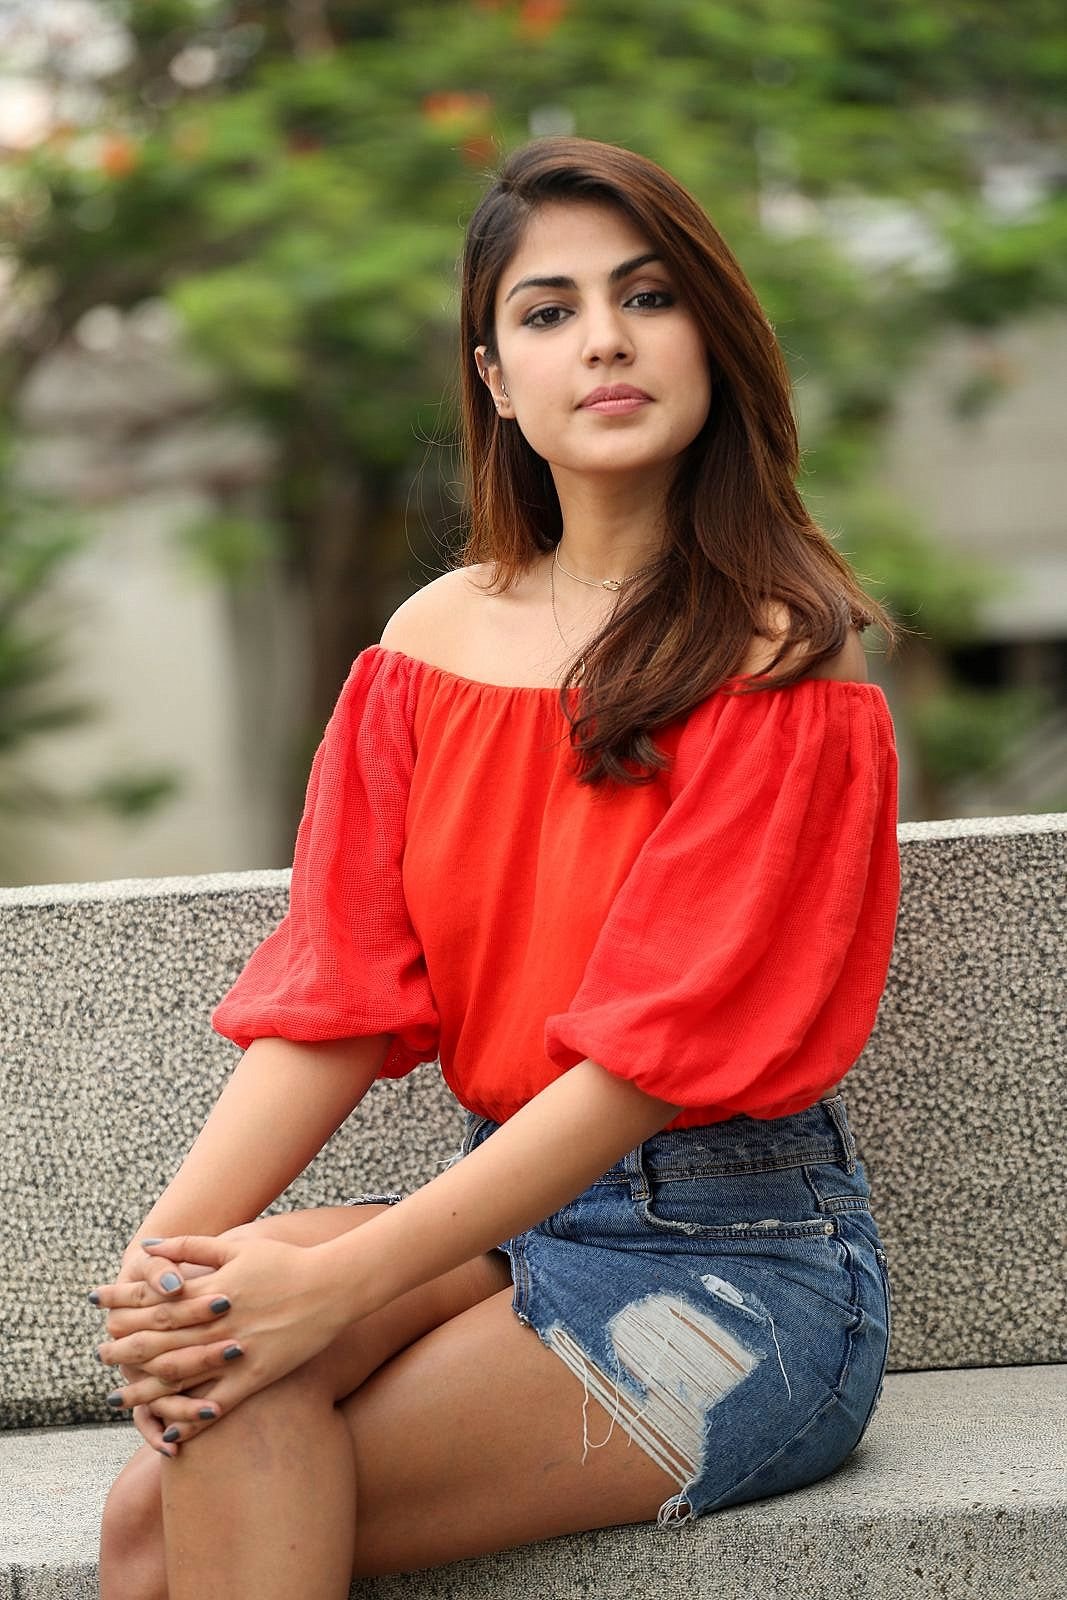 Rhea Chakraborty Displays Her Sexy Legs And Toned Midriff In Her Latest Hot Photo Shoot 1